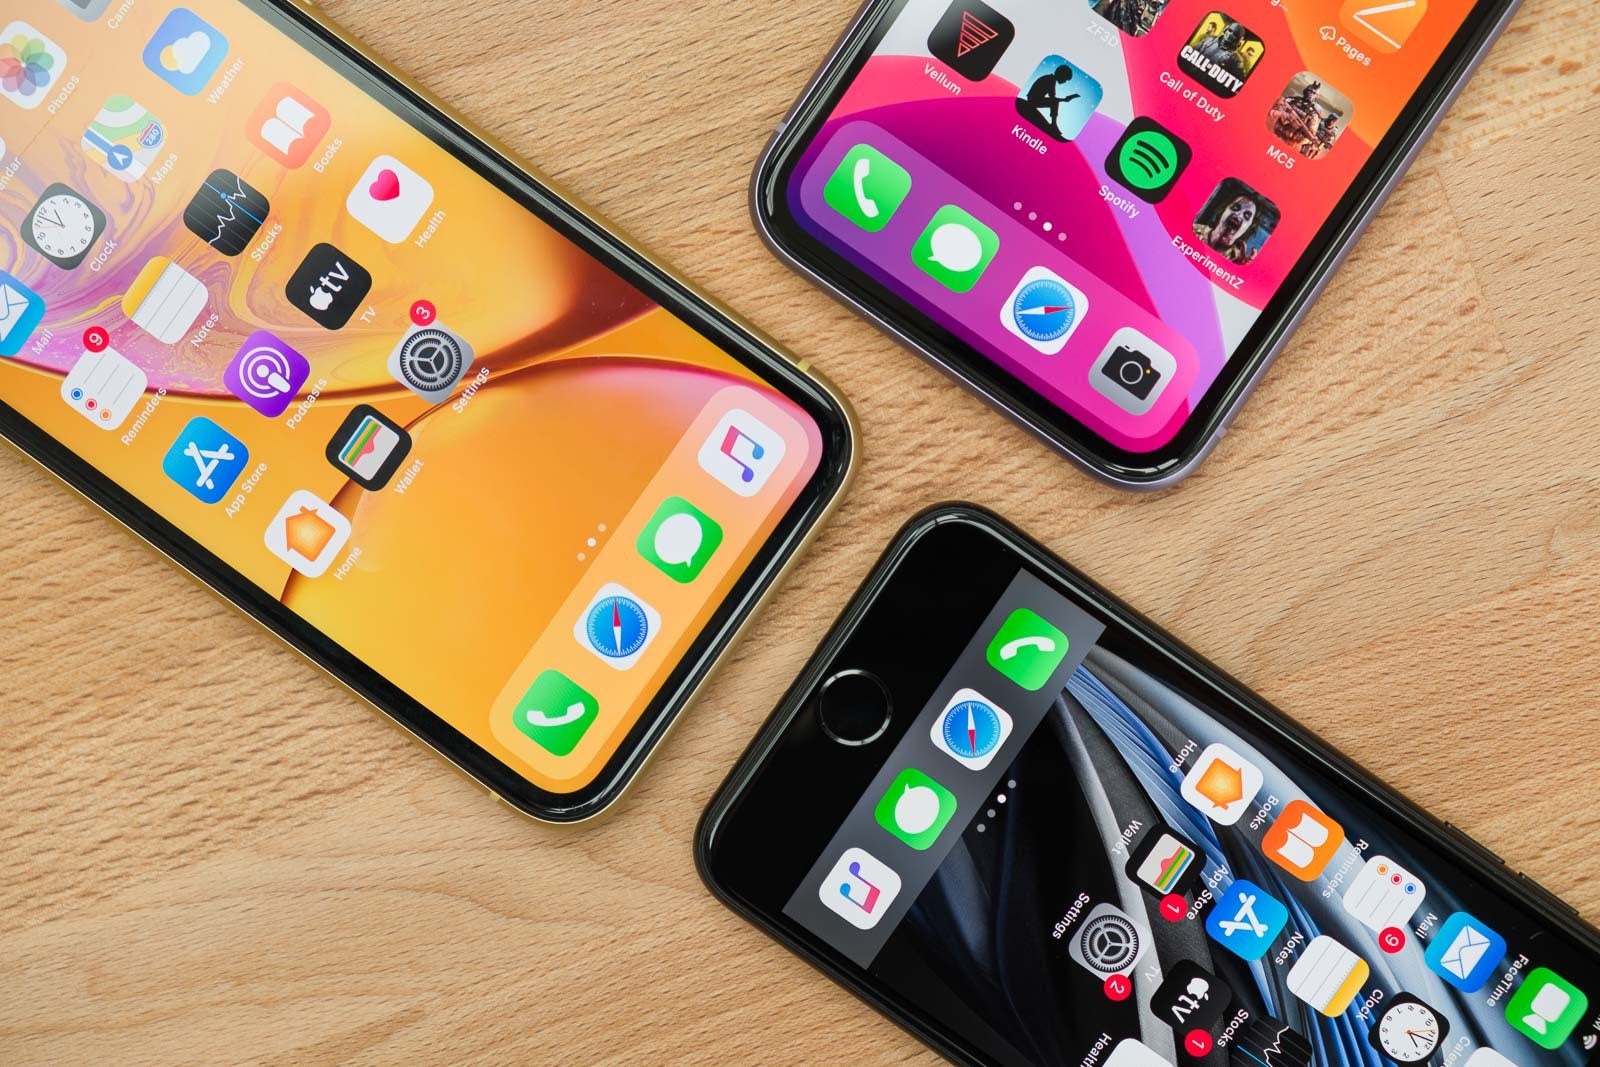  Apple iPhone SE, iPhone 11, and iPhone XR - Huawei&#039;s smartphone shipments dropped almost 60% in Western Europe last quarter